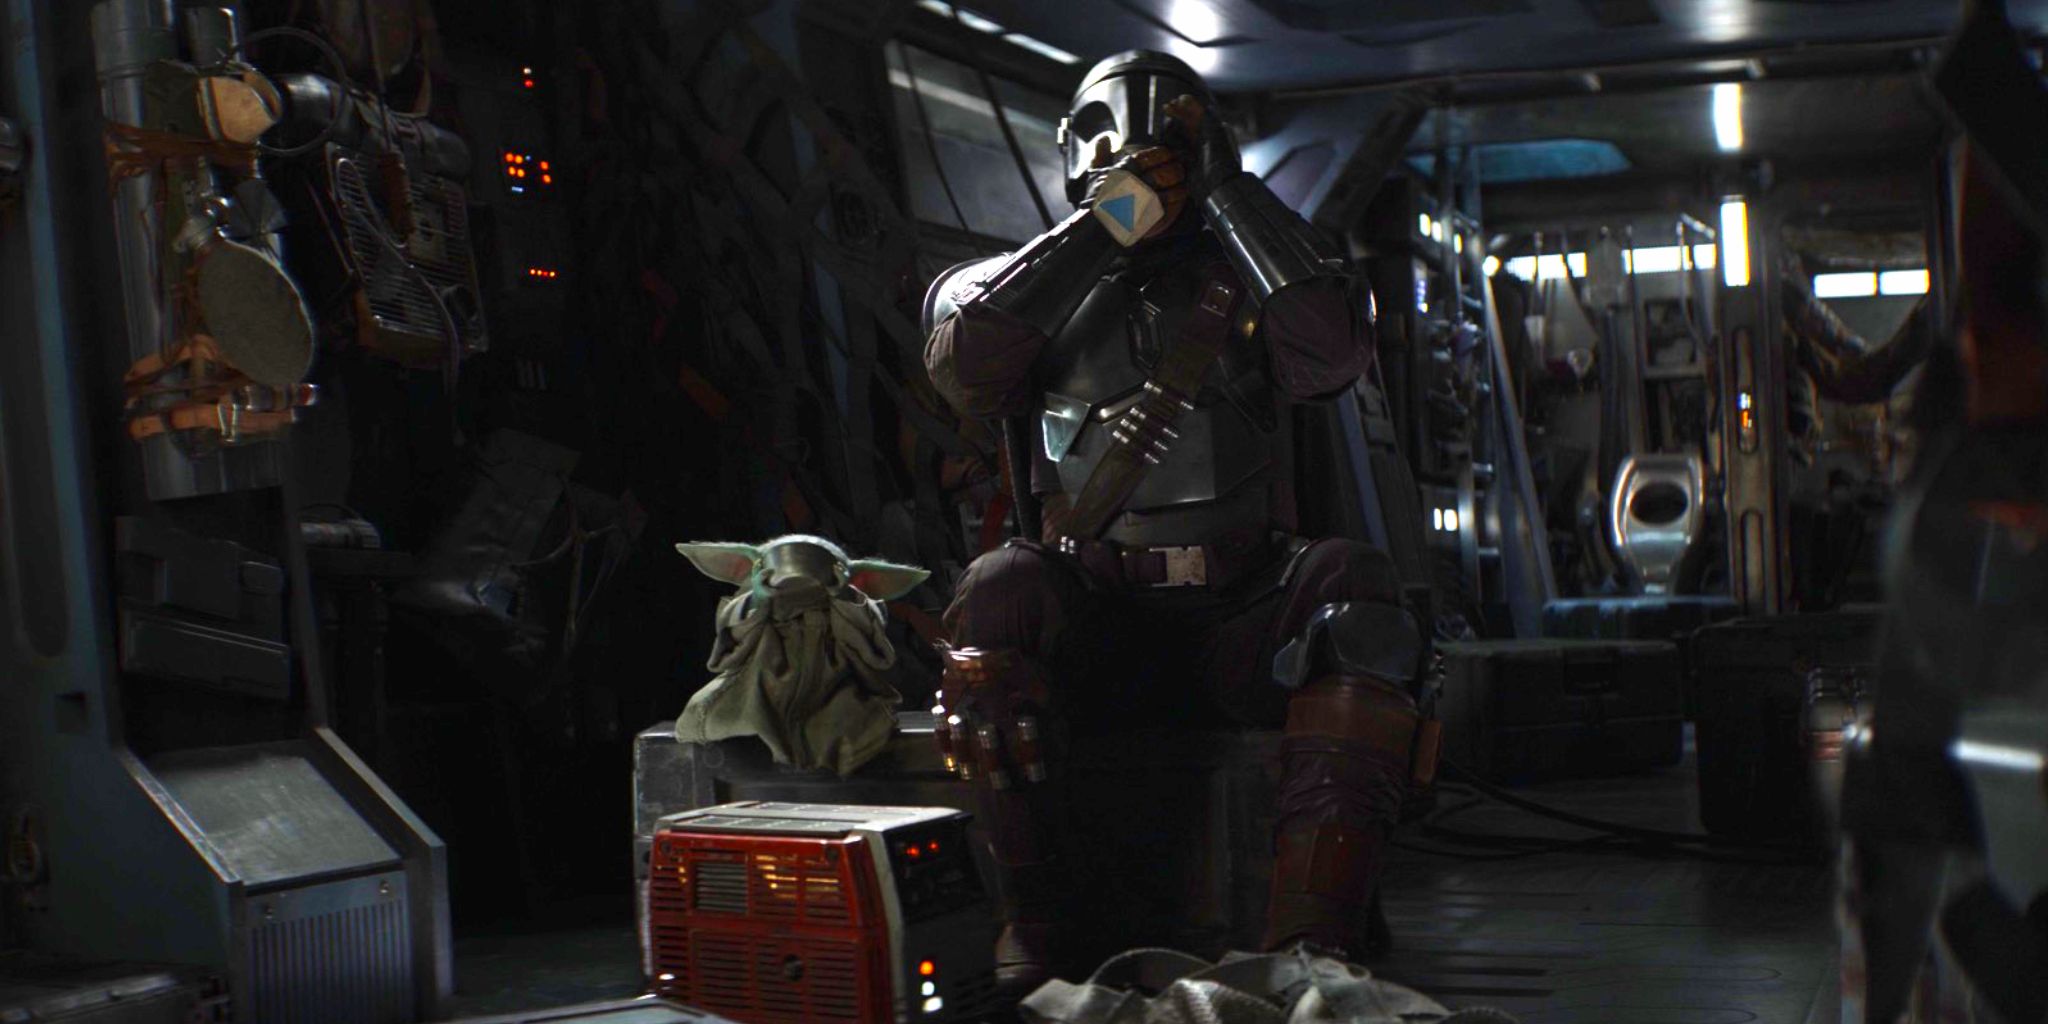 Din Djarin and Grogu sipping soup together in the Razor Crest in The Mandalorian season 2 episode 4.